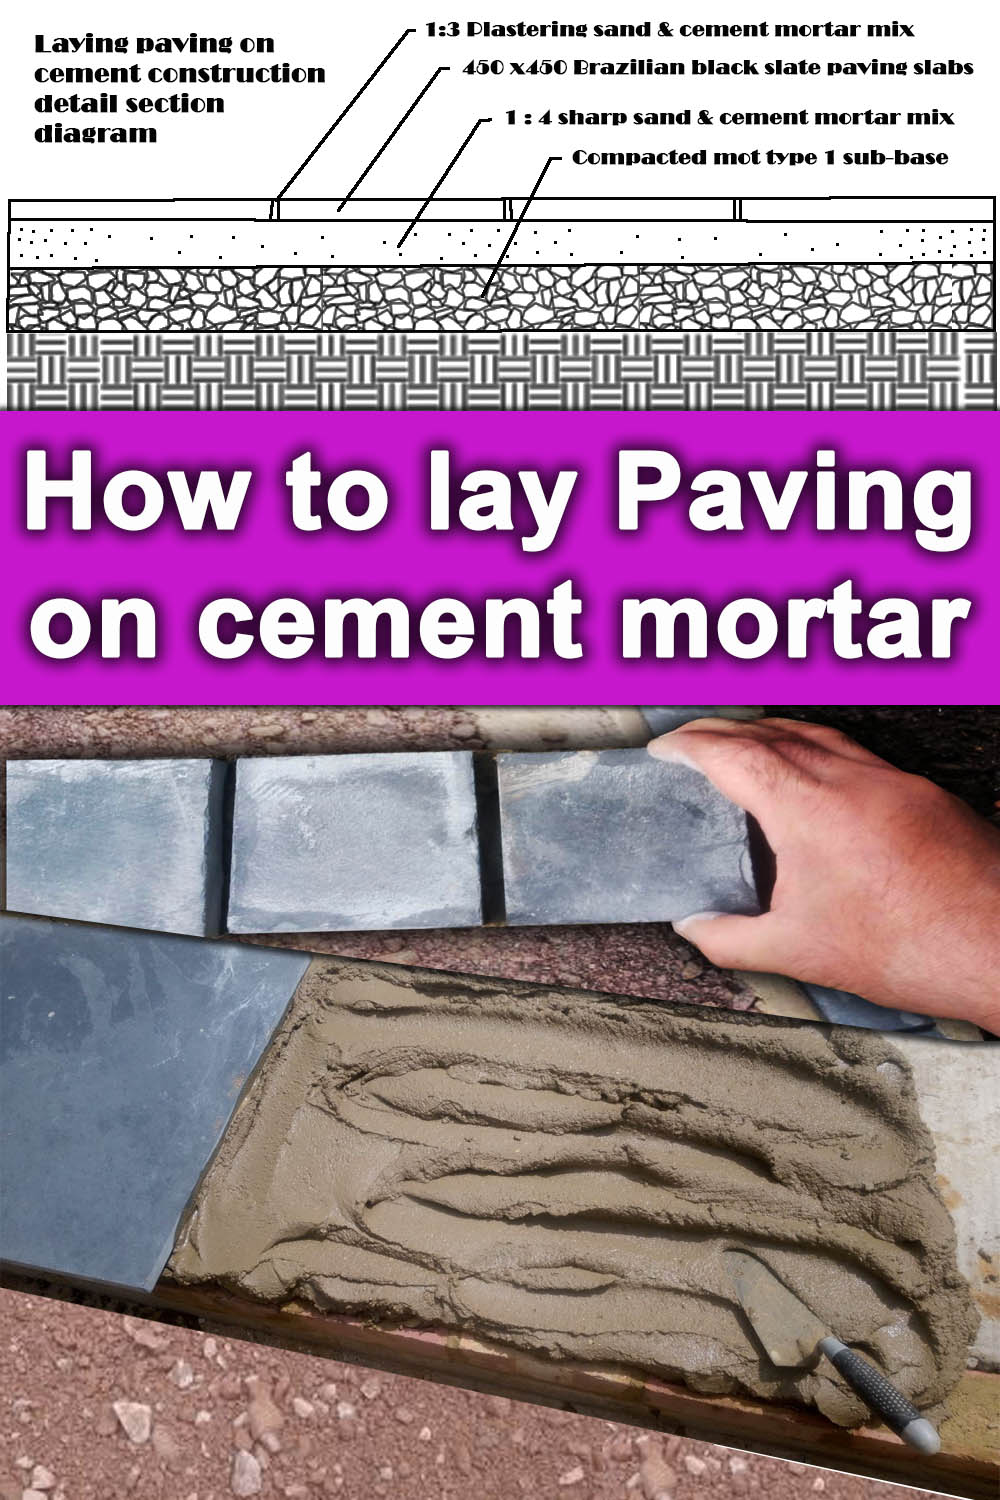 How to lay paving with cement